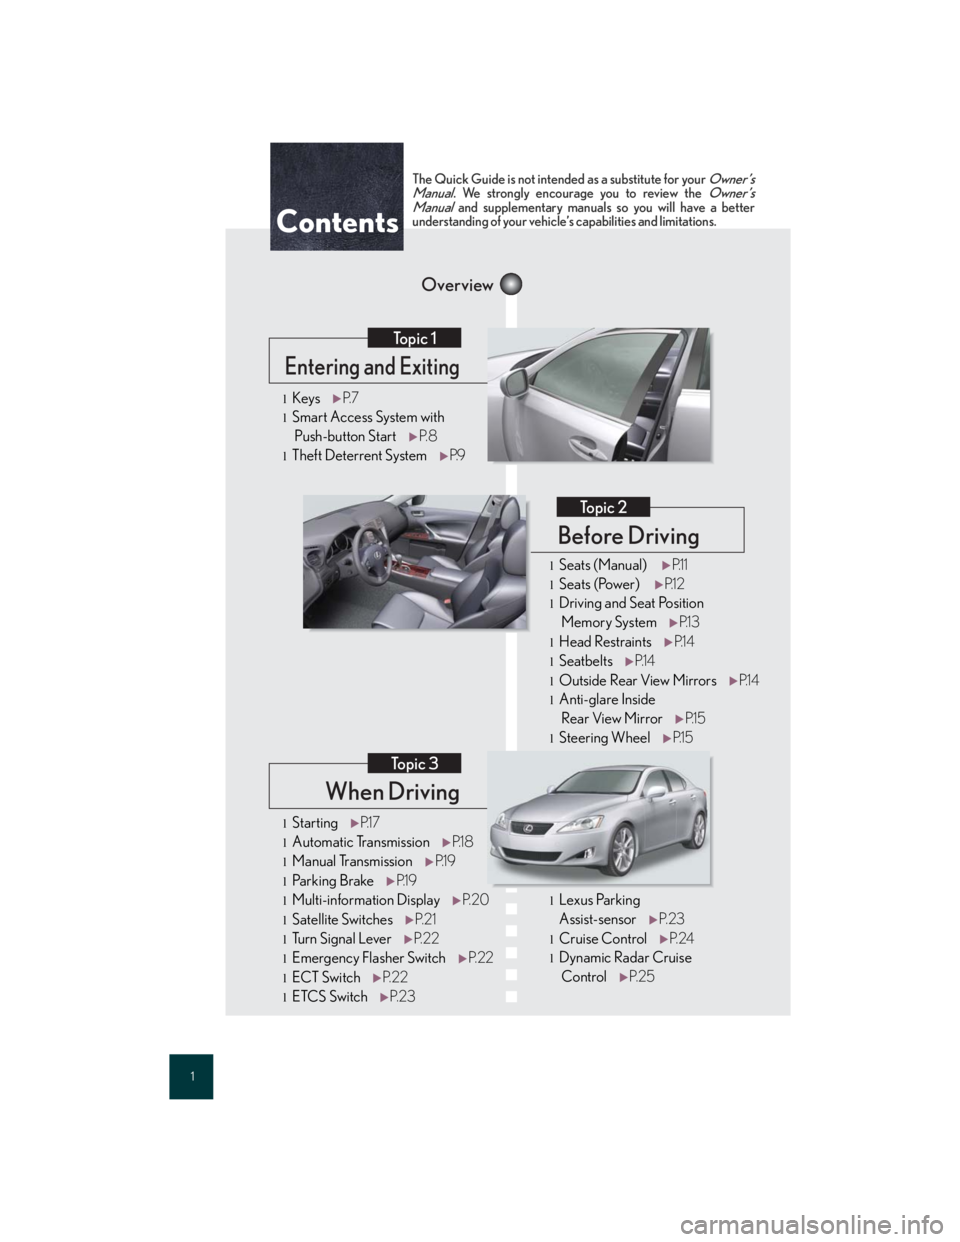 Lexus IS250 2007  Air Conditioning / LEXUS 2007 IS350/250 QUICK REFERENCE MANUAL 1
When Driving
Topic 3
Entering and Exiting
Topic 1
Before Driving
Topic 2
Overview
Contents
lStartingP.1 7
lAutomatic Transmission P.1 8
lManual TransmissionP.1 9
lPa r k i n g  B r a keP.1 9
lMulti-